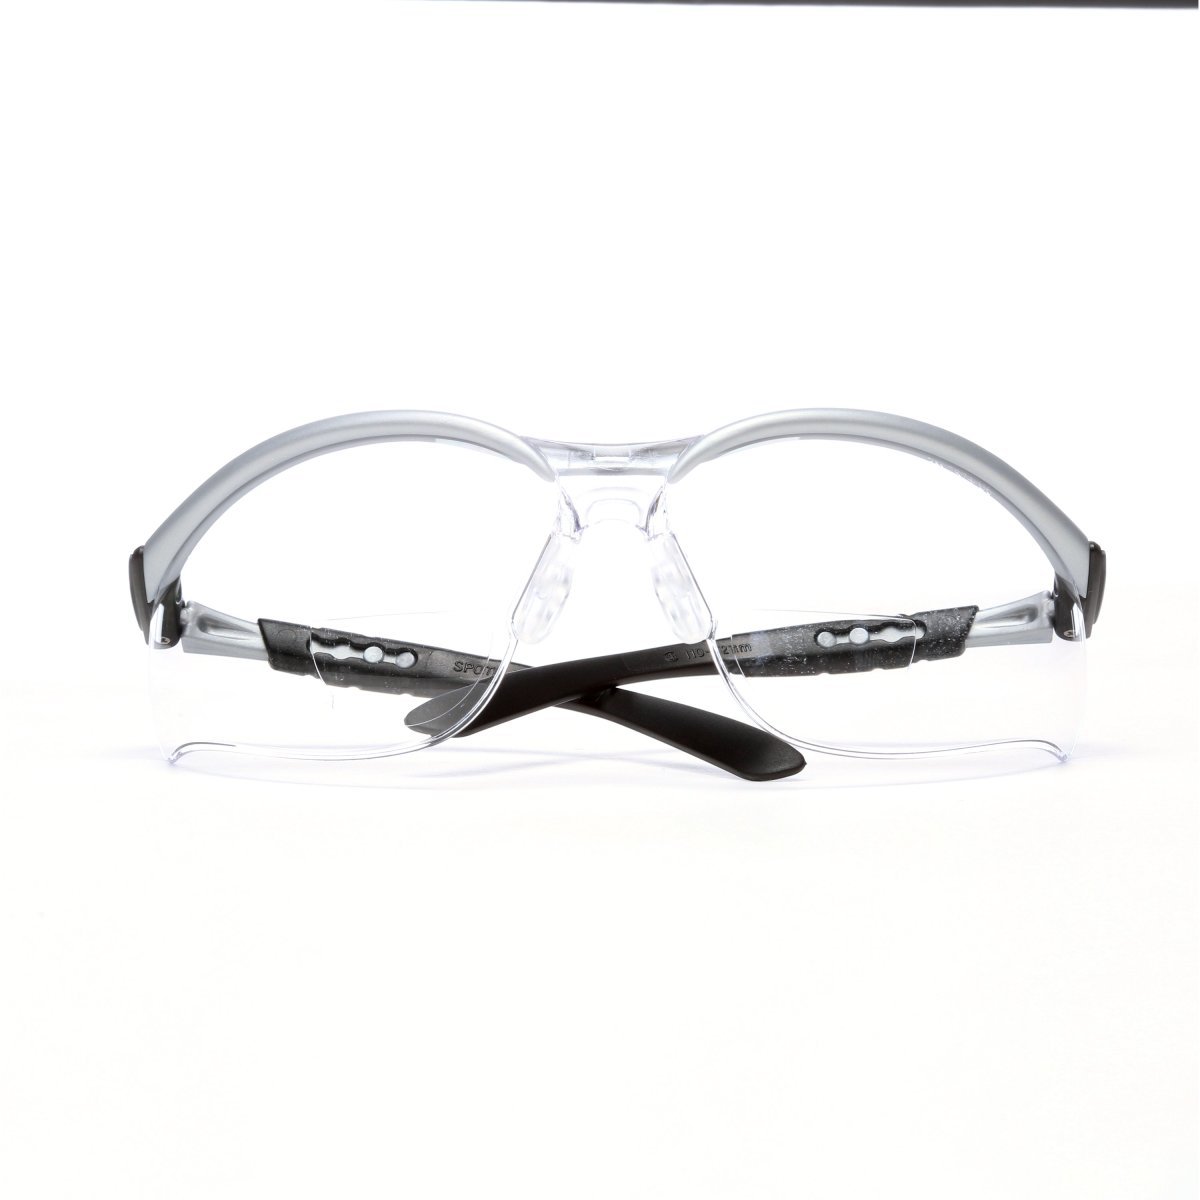 3M™ BX™ Reader Protective Eyewear 11374-00000-20 Clear Lens, Silver Frame, +1.5 Diopter (Availability restrictions apply.)